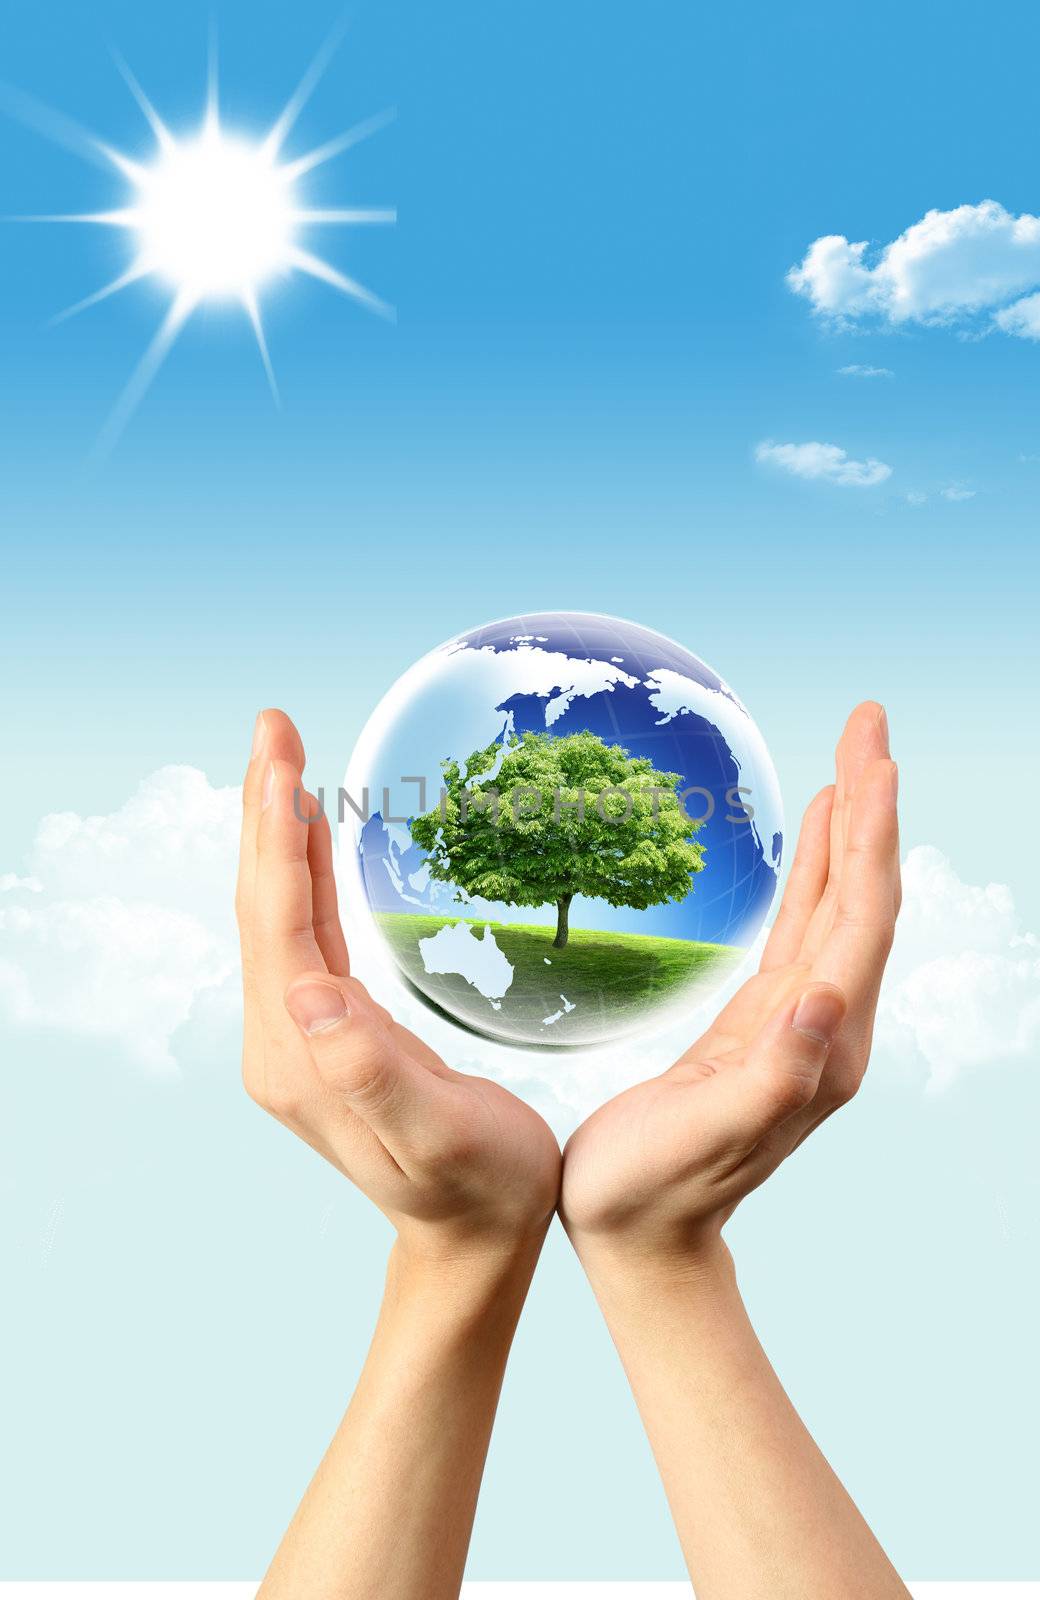 Green tree in Globe which is in hands